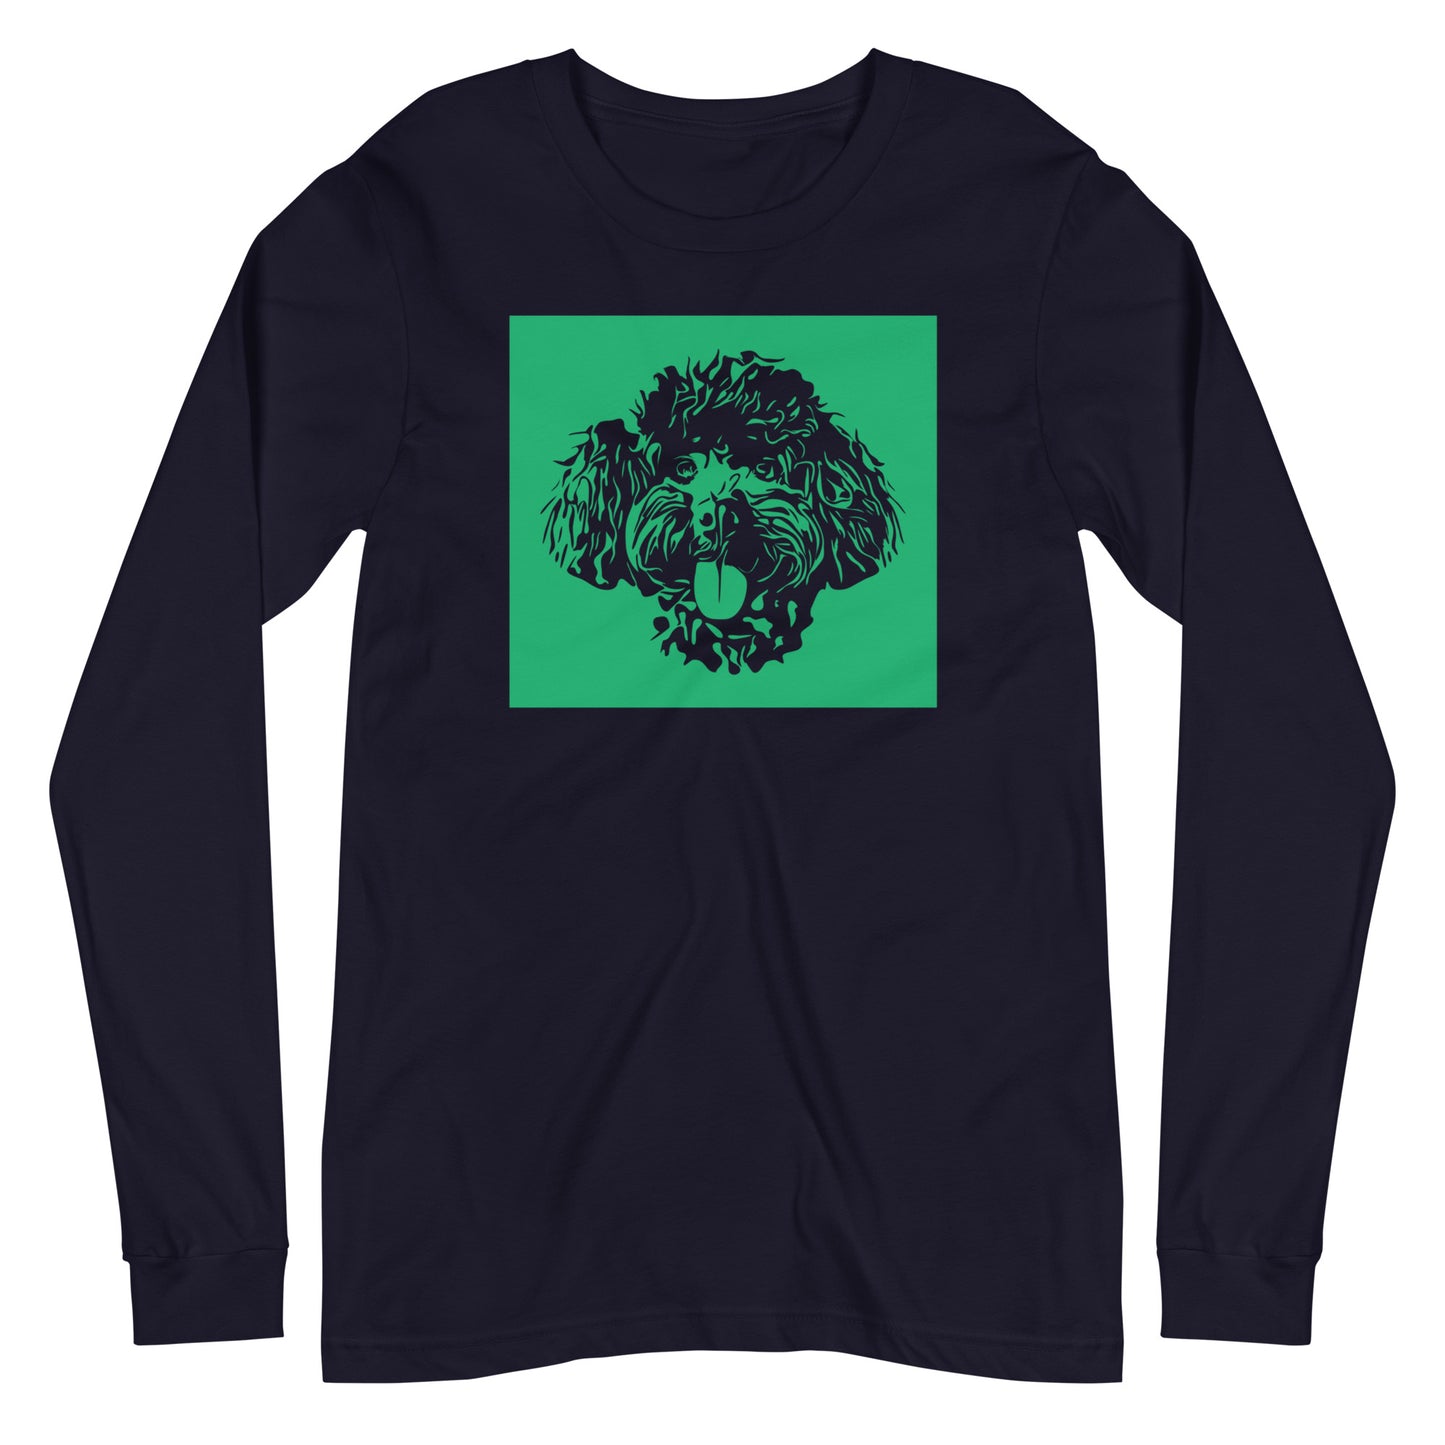 Toy Poodle face Silhouette with green background square on unisex navy long sleeve t-shirt